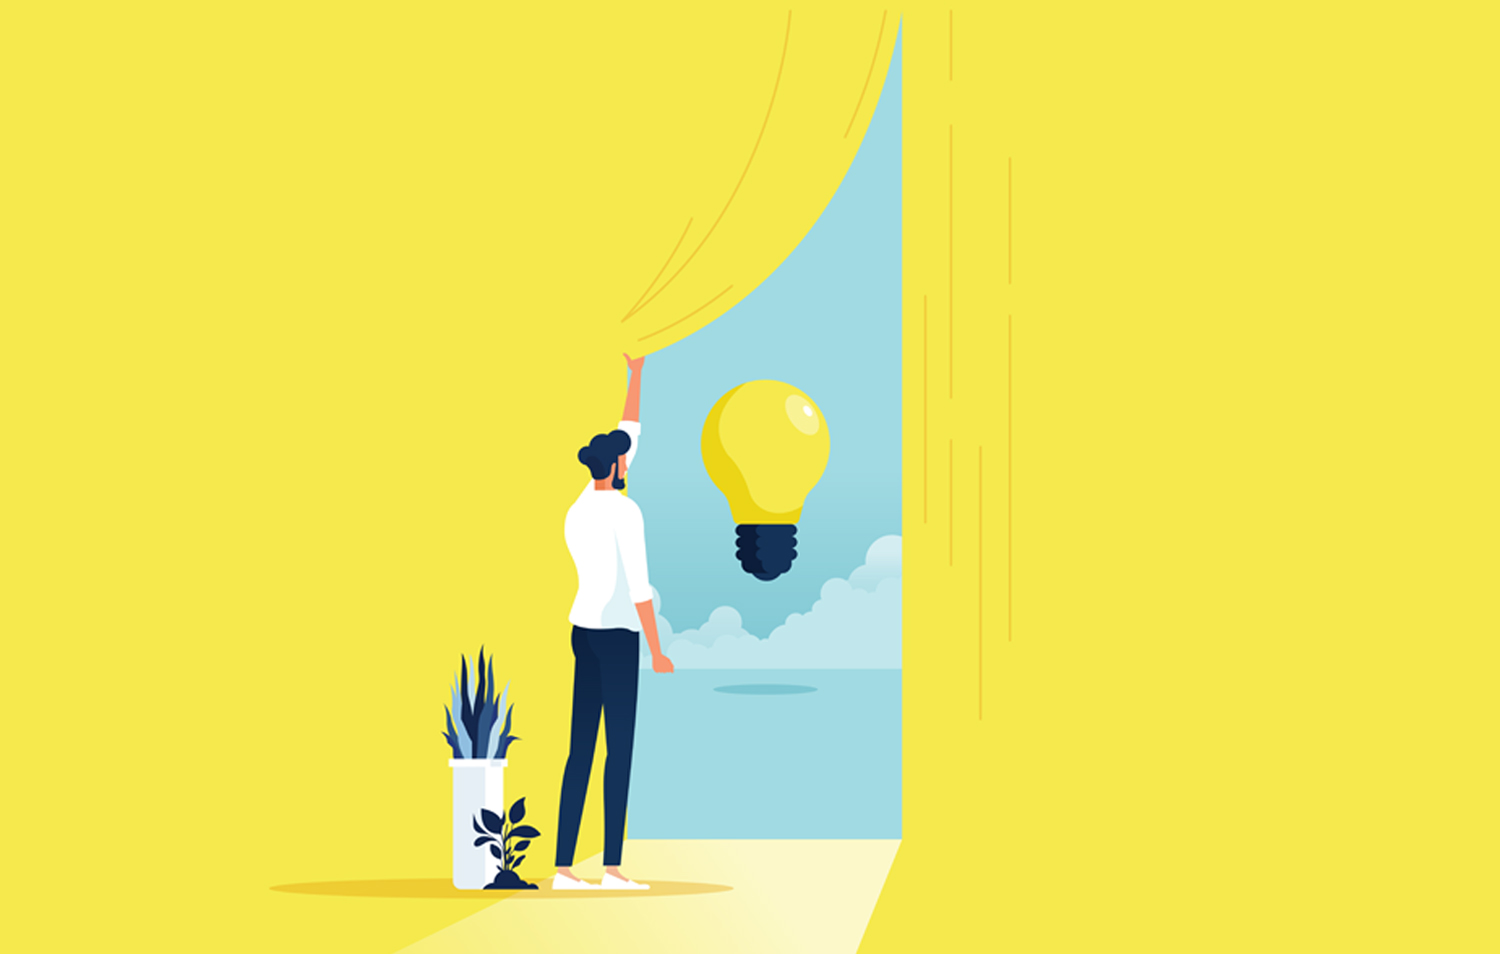 minimal illustration of a man pulling a bright yellow curtain back slightly, revealing a light bulb floating among clouds